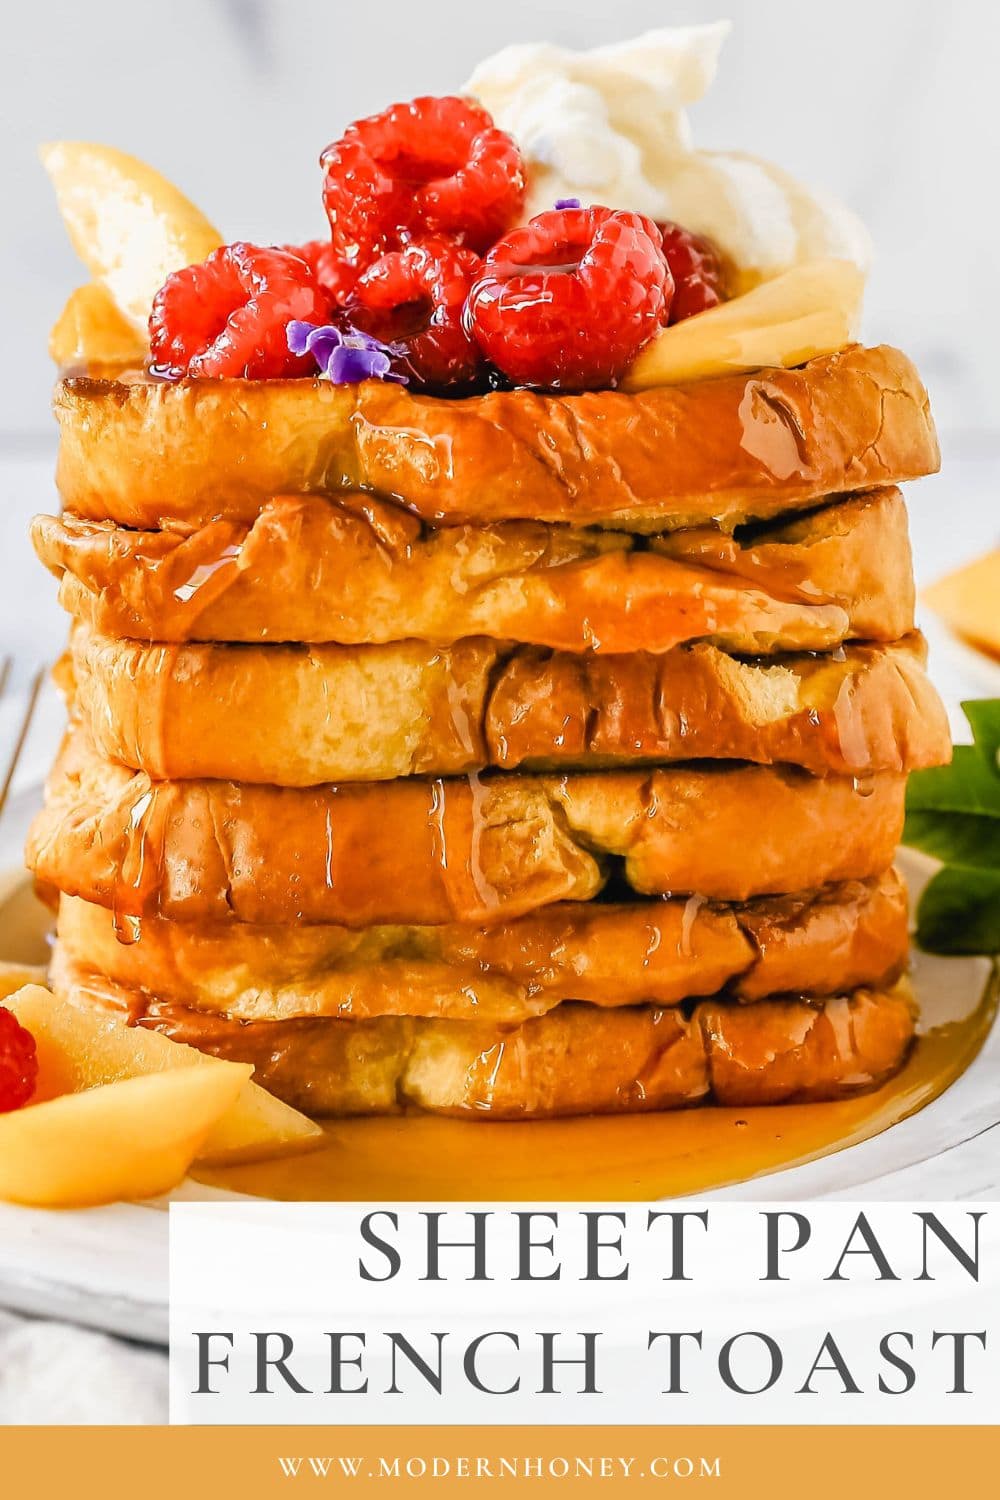 Easy Sheet Pan French Toast is made by dipping the bread into a custard batter and baking on a sheet pan in the oven. It makes it so much easier to make homemade french toast! Top this Oven Baked French Toast with a sweet Mascarpone Cream and Sweetened Fresh Fruit.